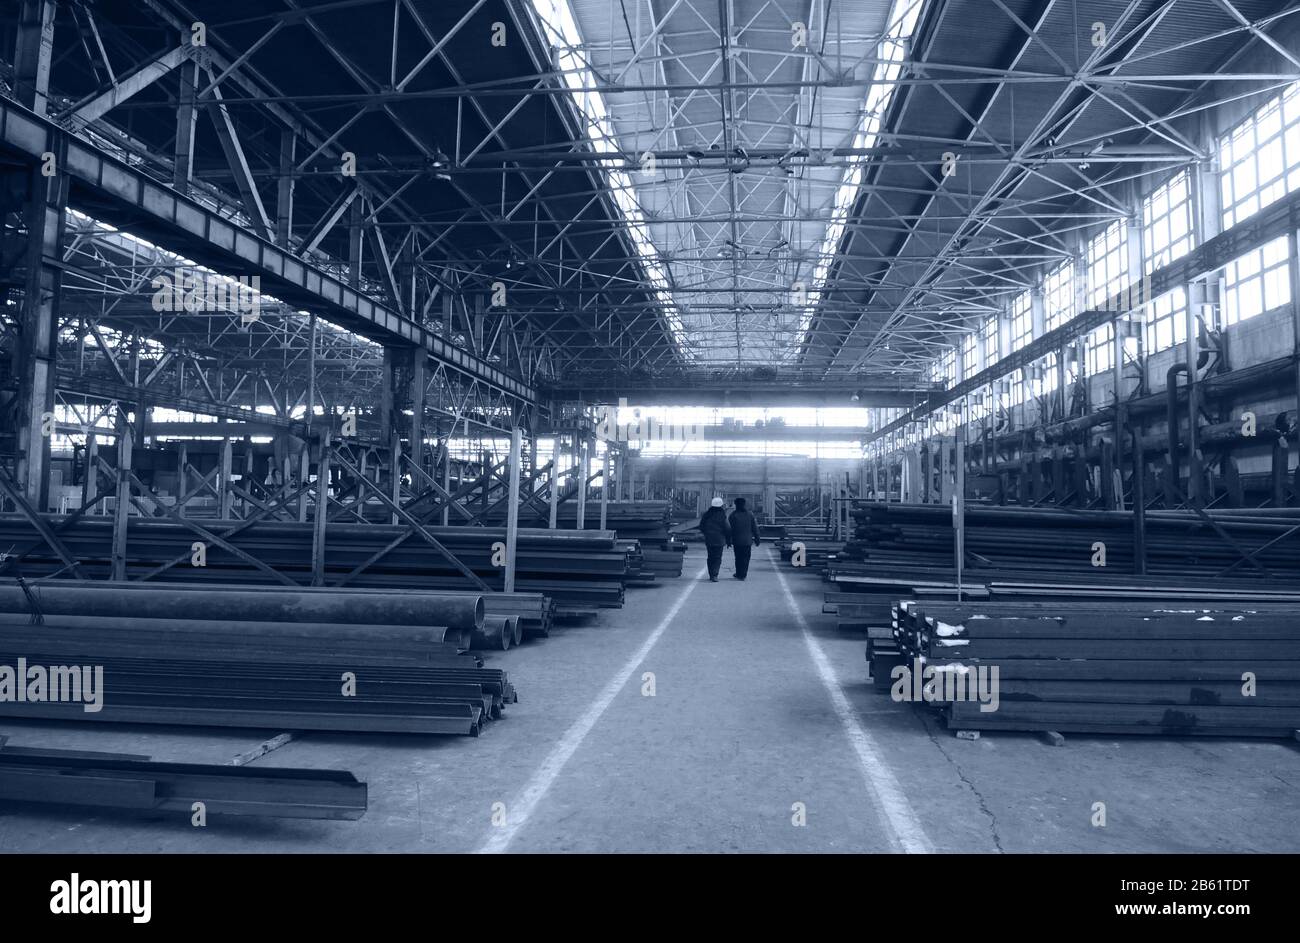 Rambling shop floor has been built as steel construction. This production department make a specialty out of metalworks manufacturing. Stock Photo